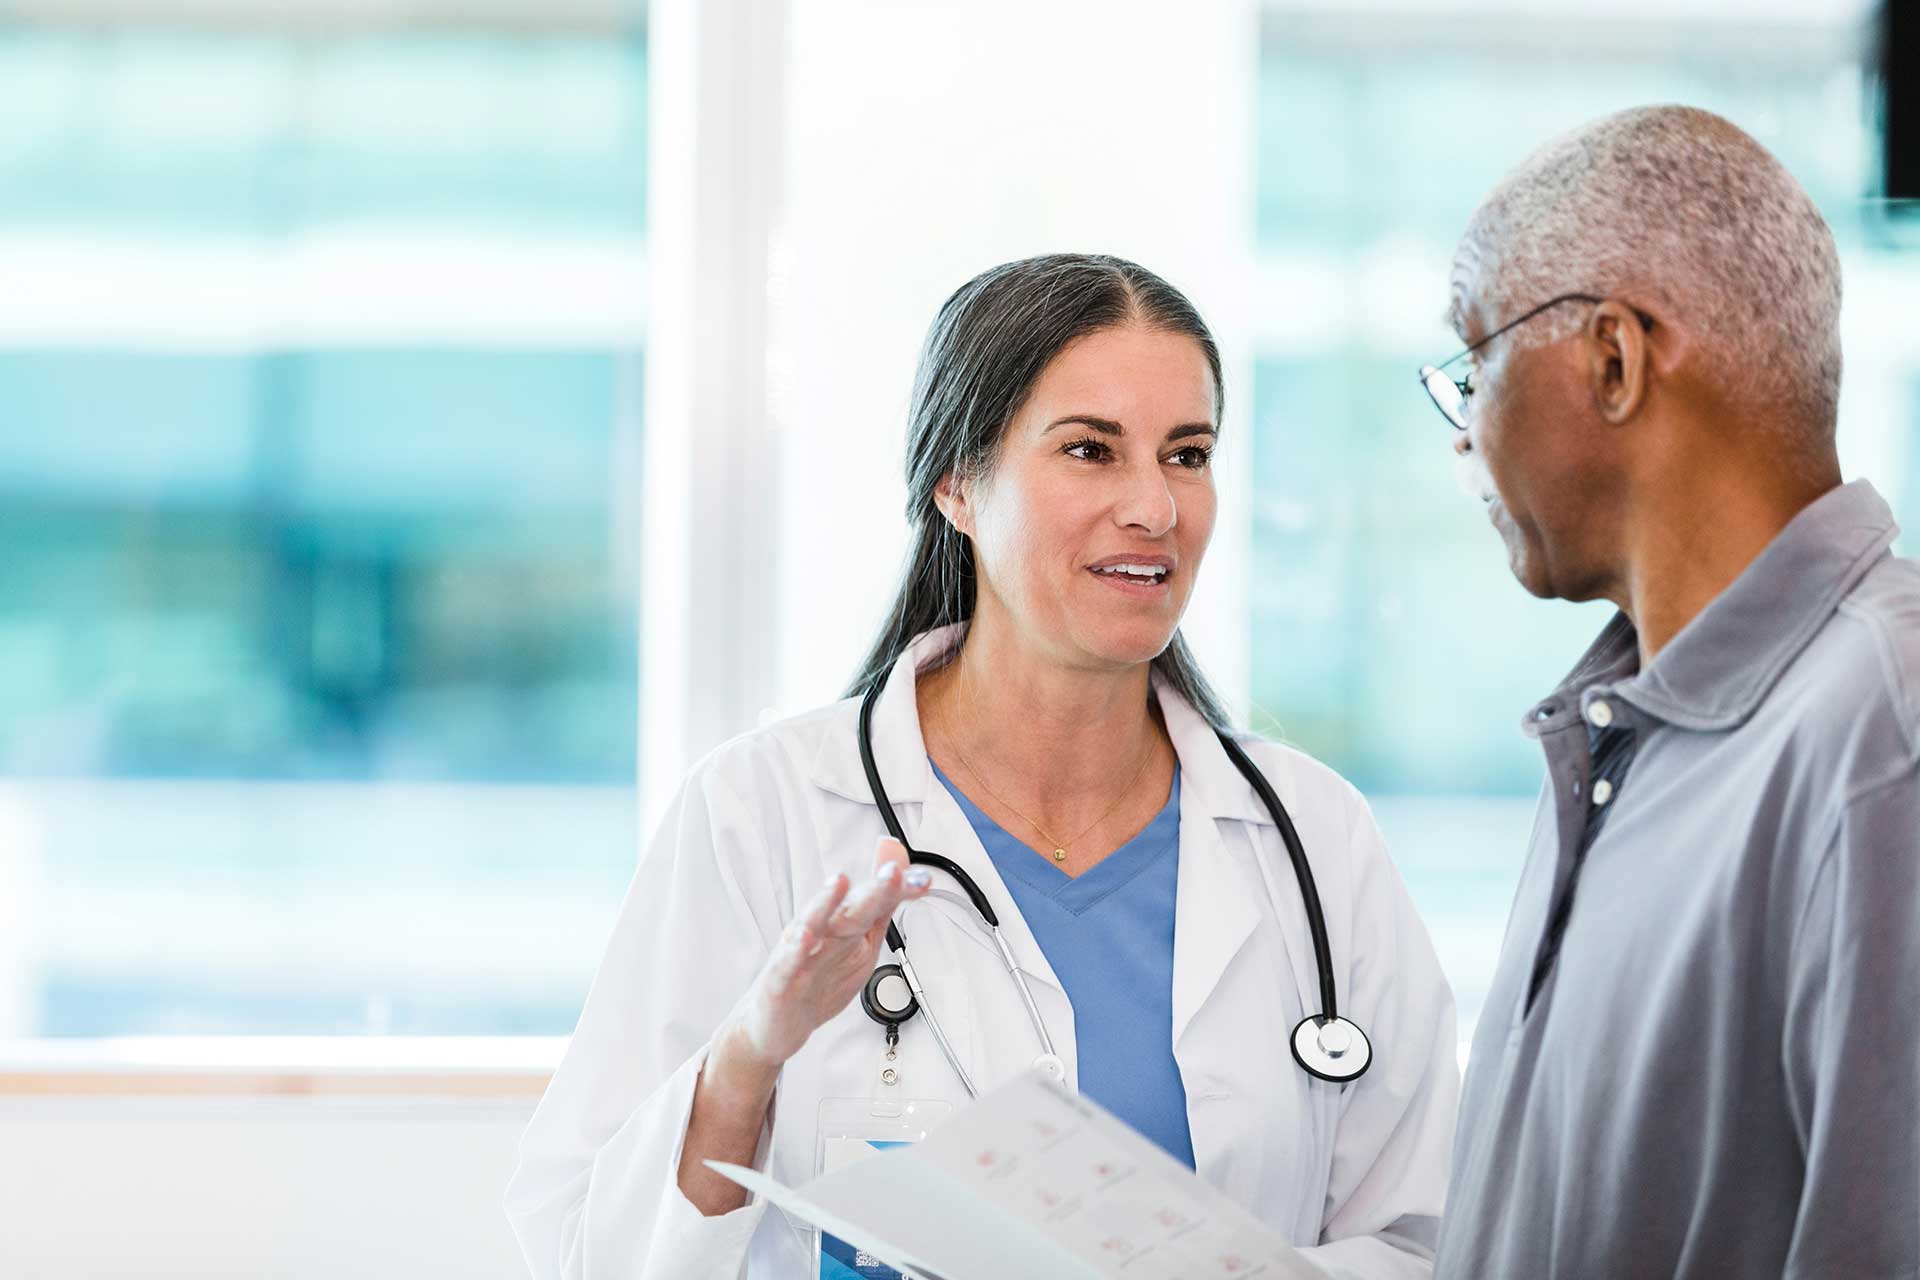 A doctor having a discussion with a patient